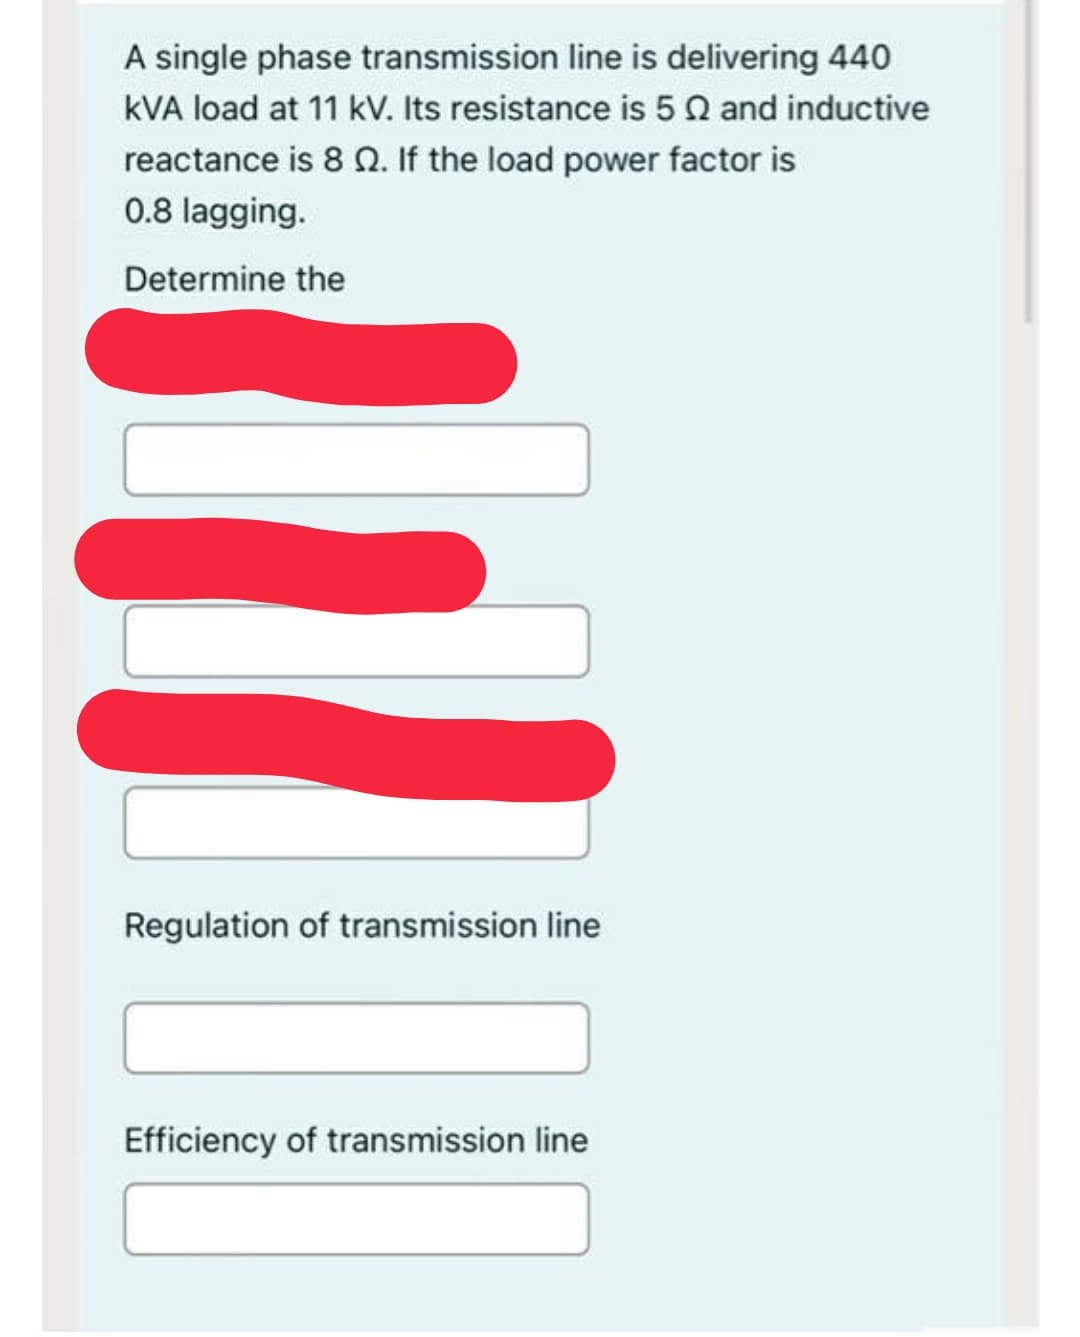 A single phase transmission line is delivering 440
kVA load at 11 kV. Its resistance is 50 and inductive
reactance is 8 Q. If the load power factor is
0.8 lagging.
Determine the
Regulation of transmission line
Efficiency of transmission line
